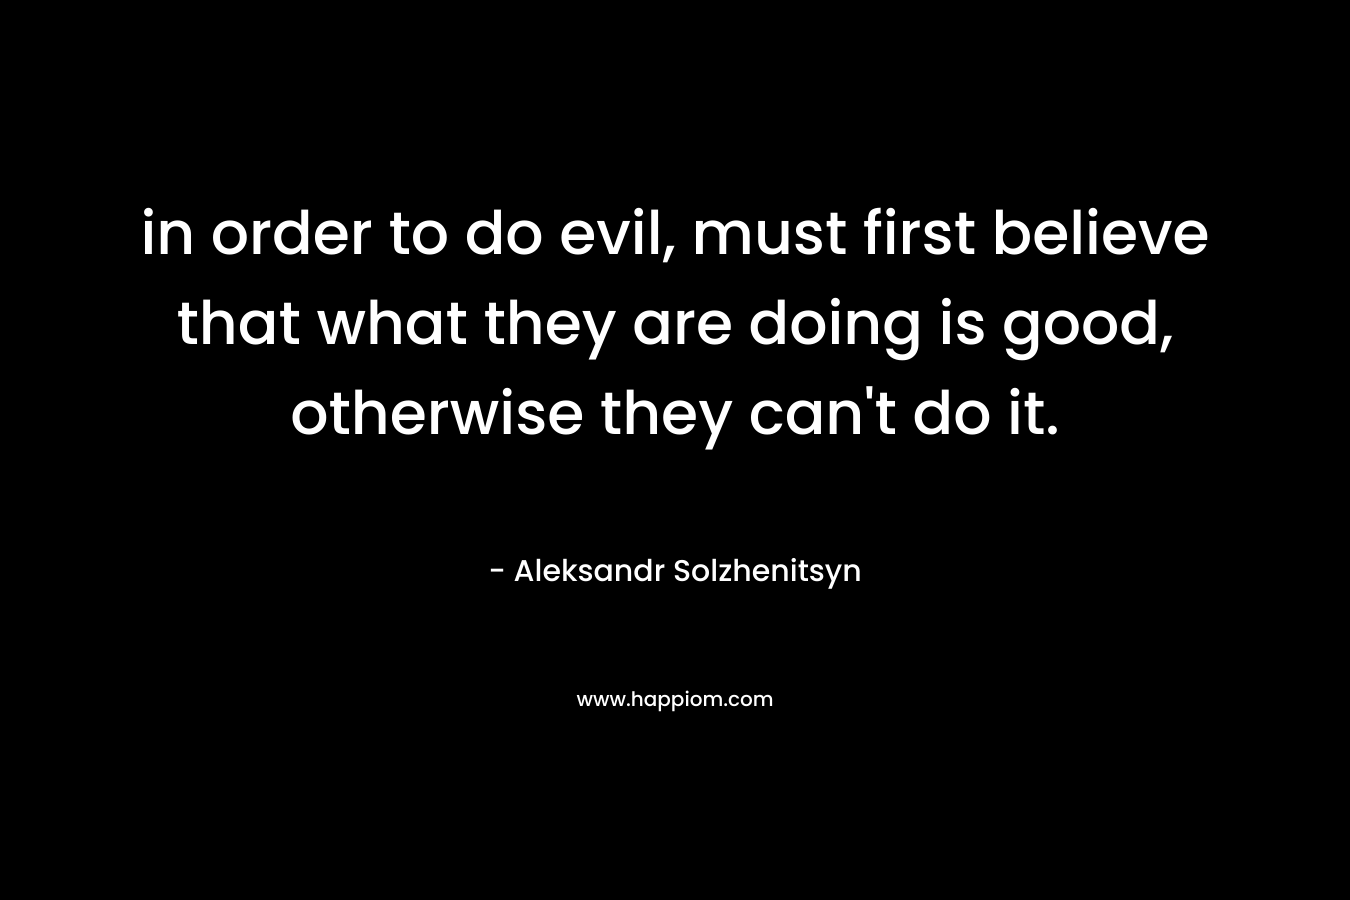 in order to do evil, must first believe that what they are doing is good, otherwise they can't do it.